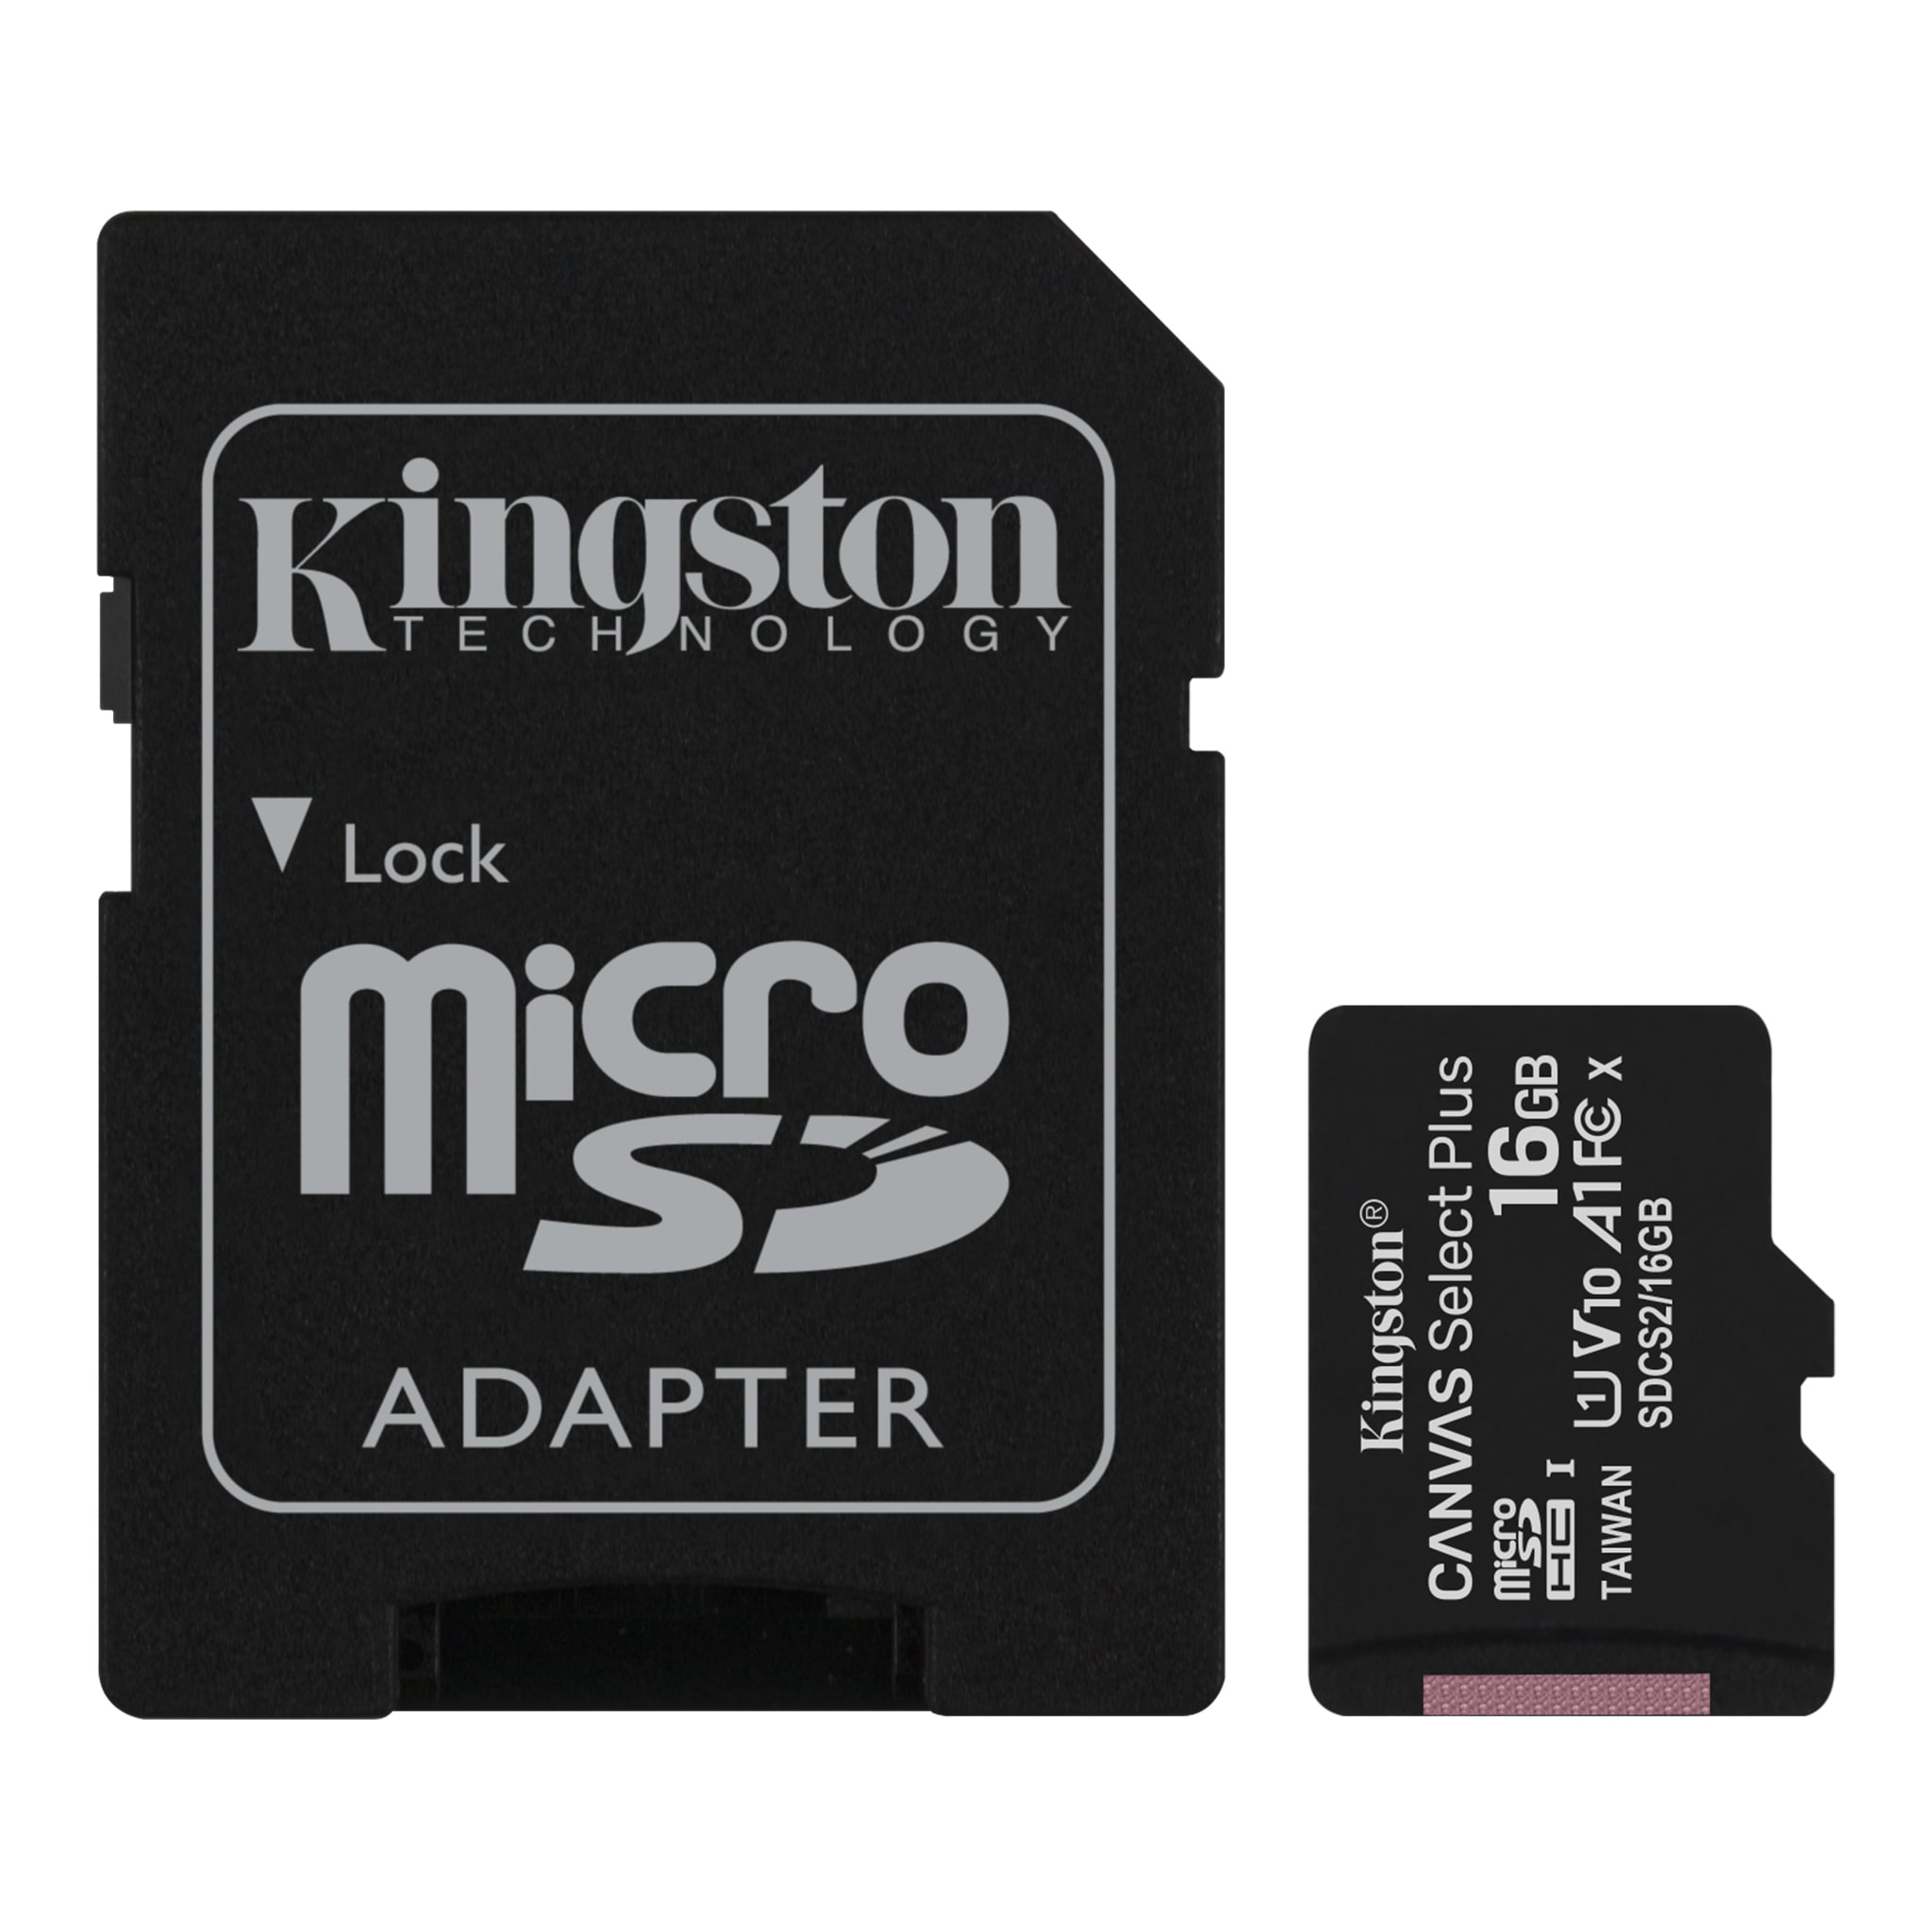 Kingston 512GB Samsung SM-N910R MicroSDXC Canvas Select Plus Card Verified by SanFlash. 100MBs Works with Kingston